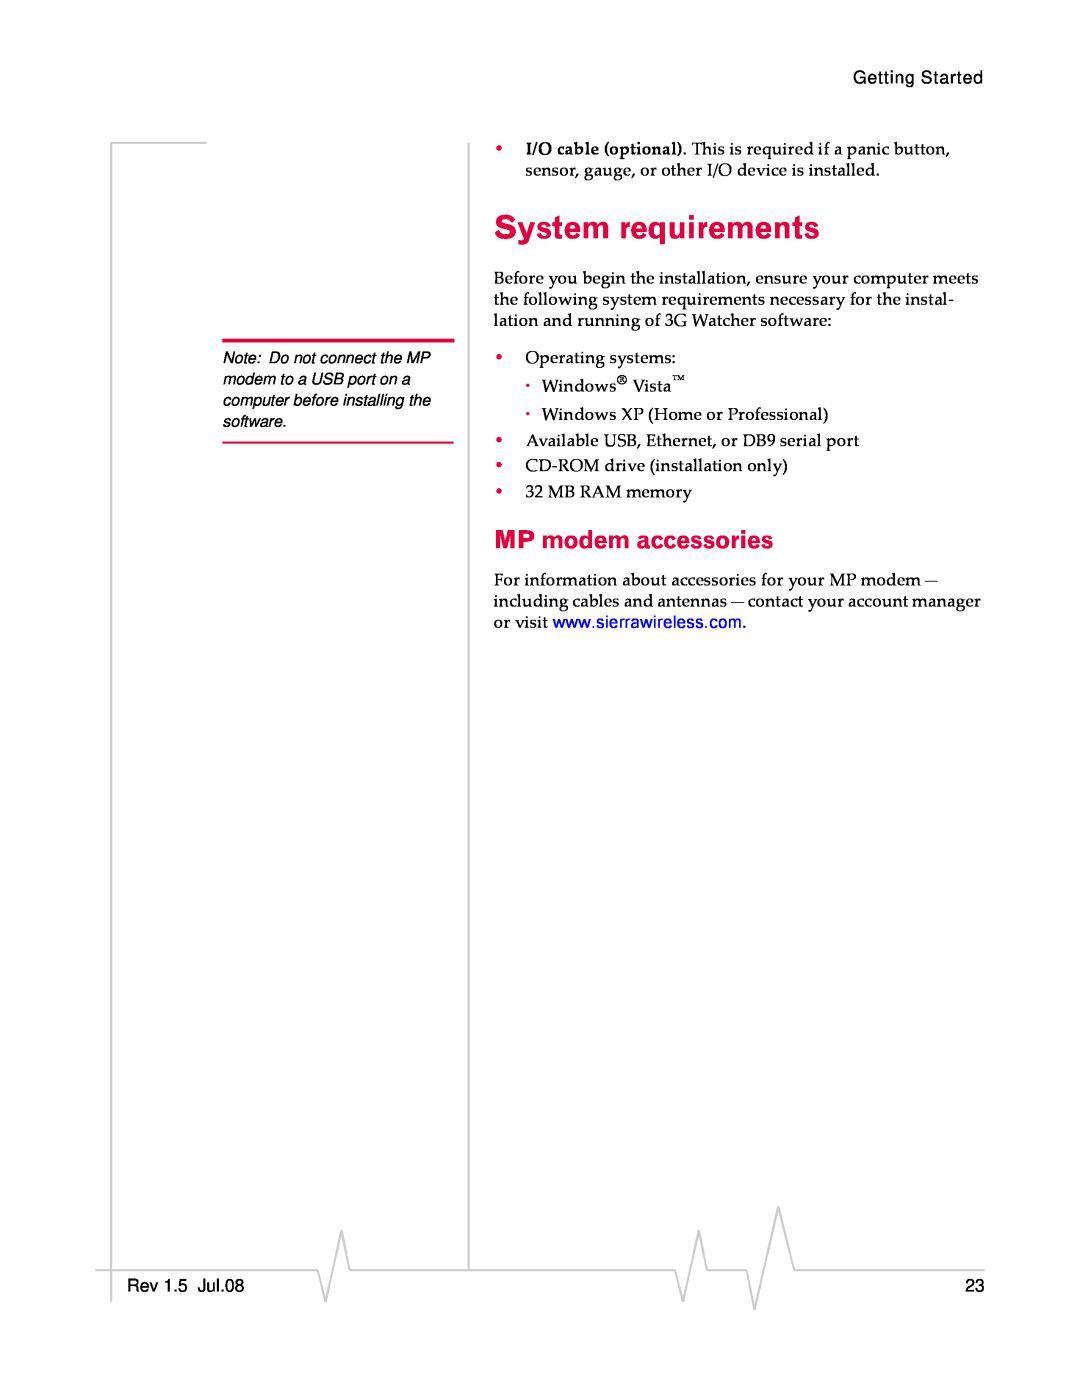 Sierra Wireless MP 880W manual System requirements, MP modem accessories 